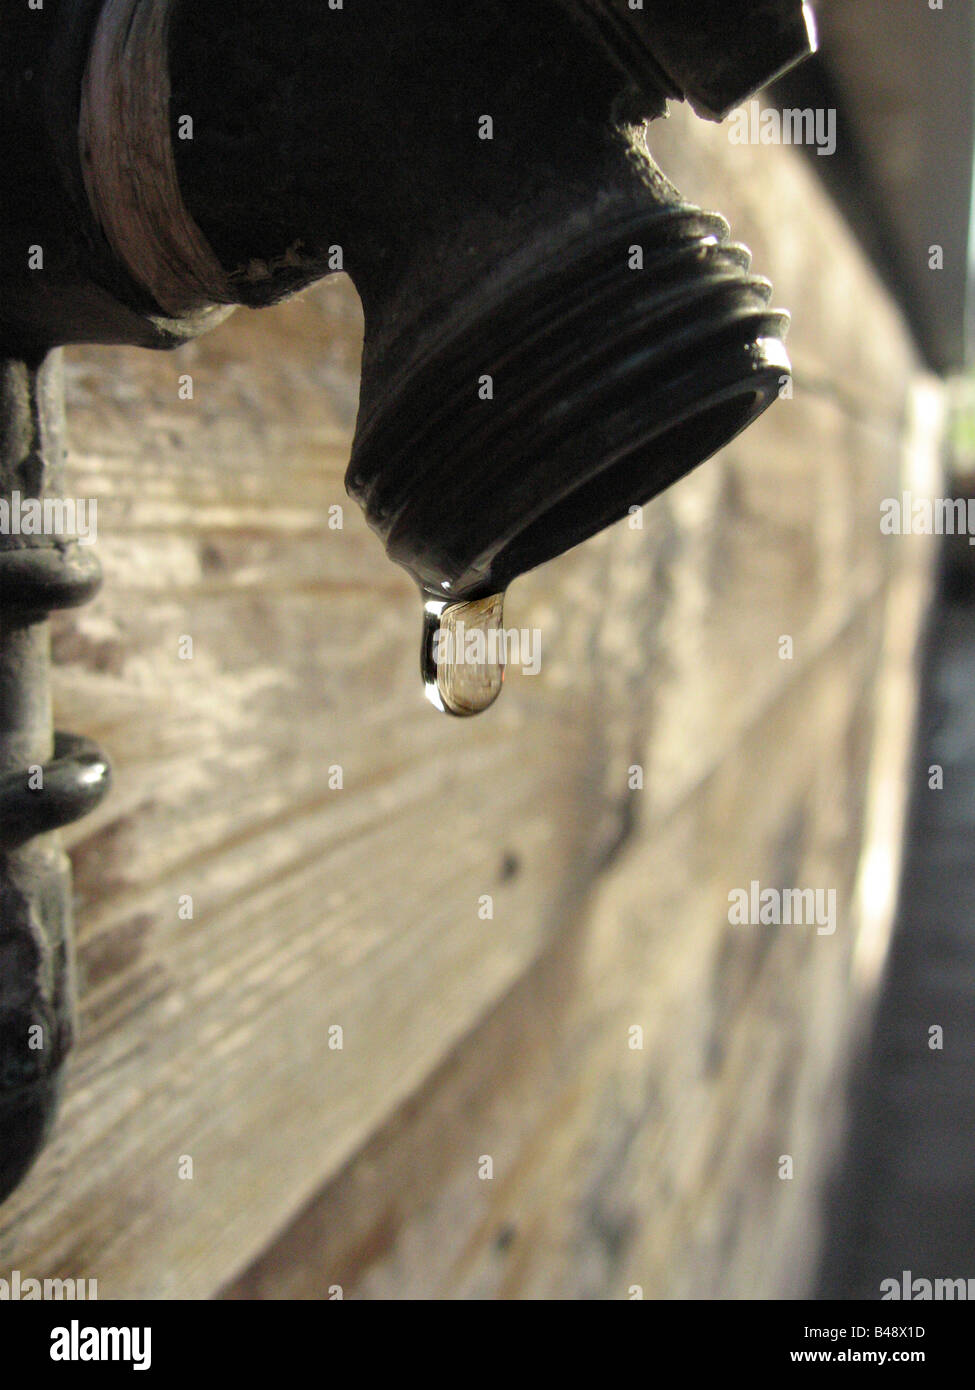 A dripping and neglected tap illustrates the importance of maintenance for water conservation. Stock Photo